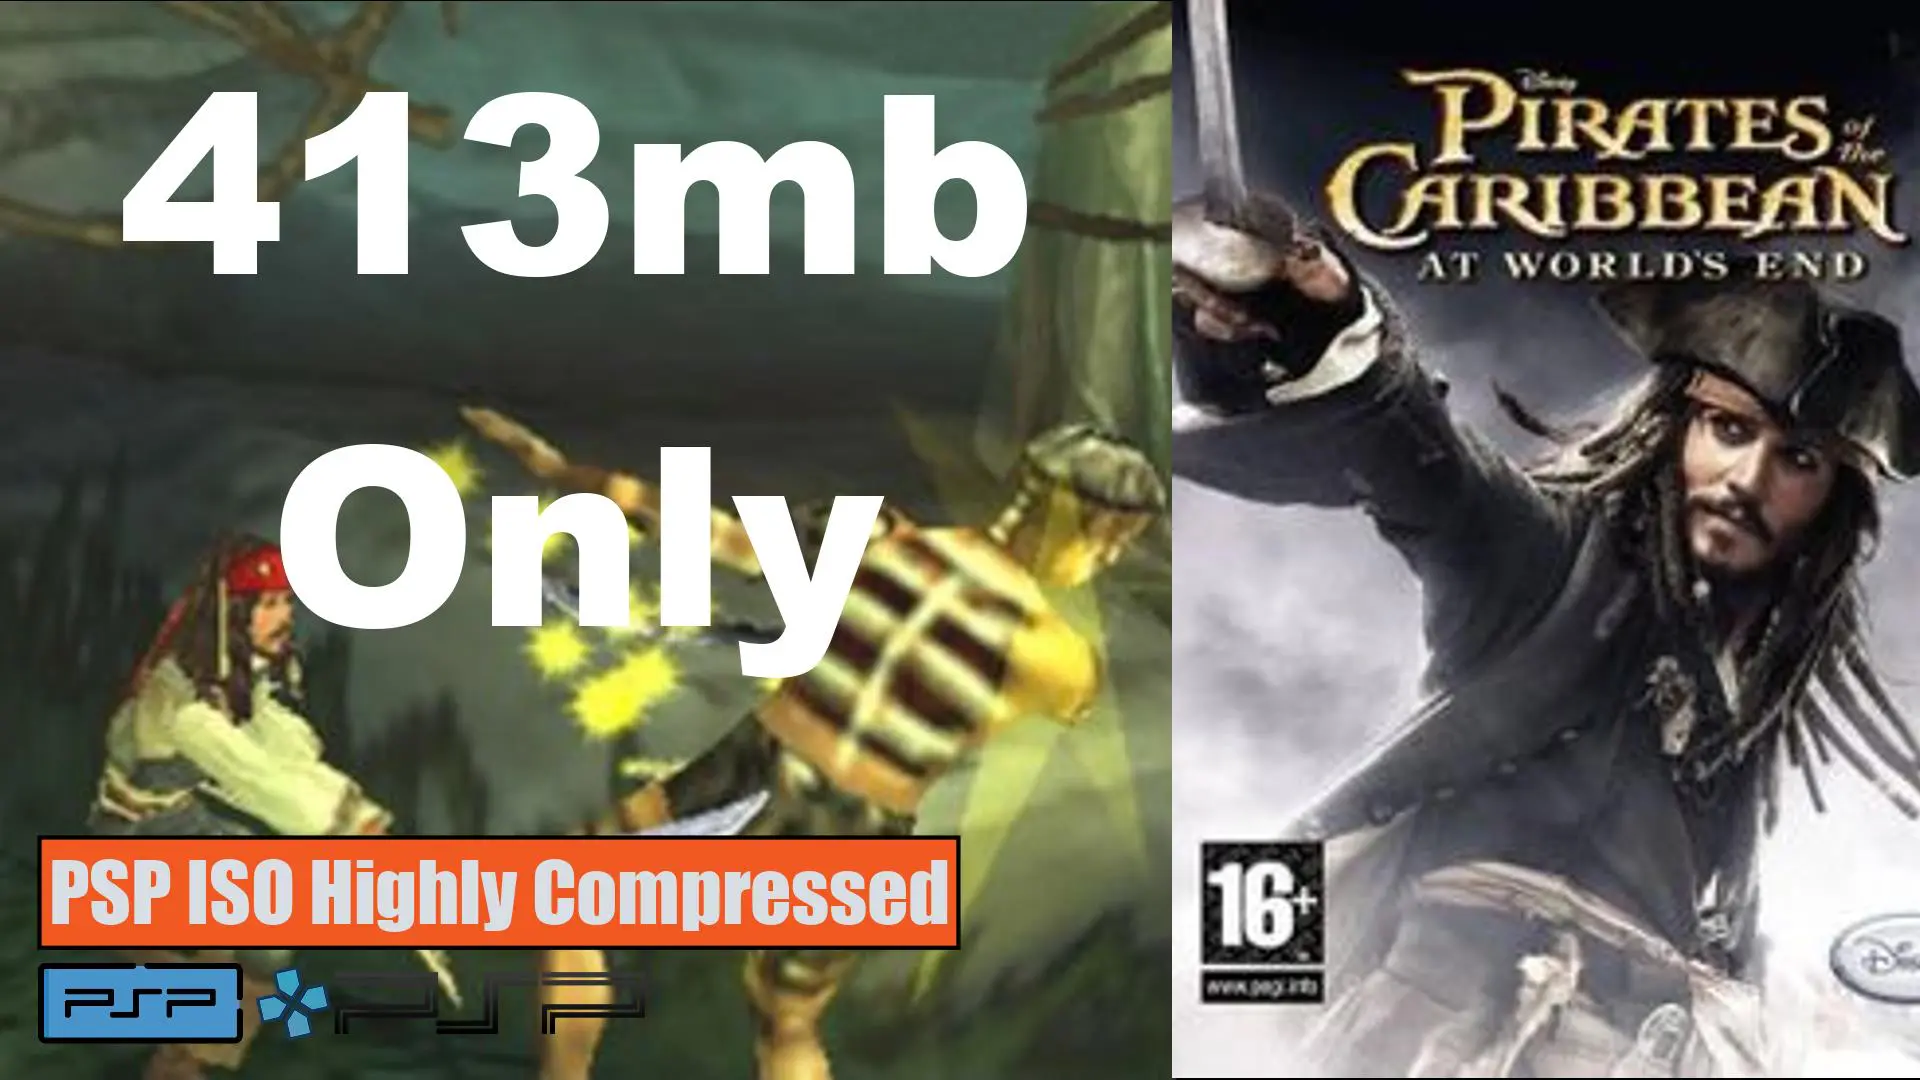 Pirates of The Caribbean at World's End PSP ISO Highly Compressed